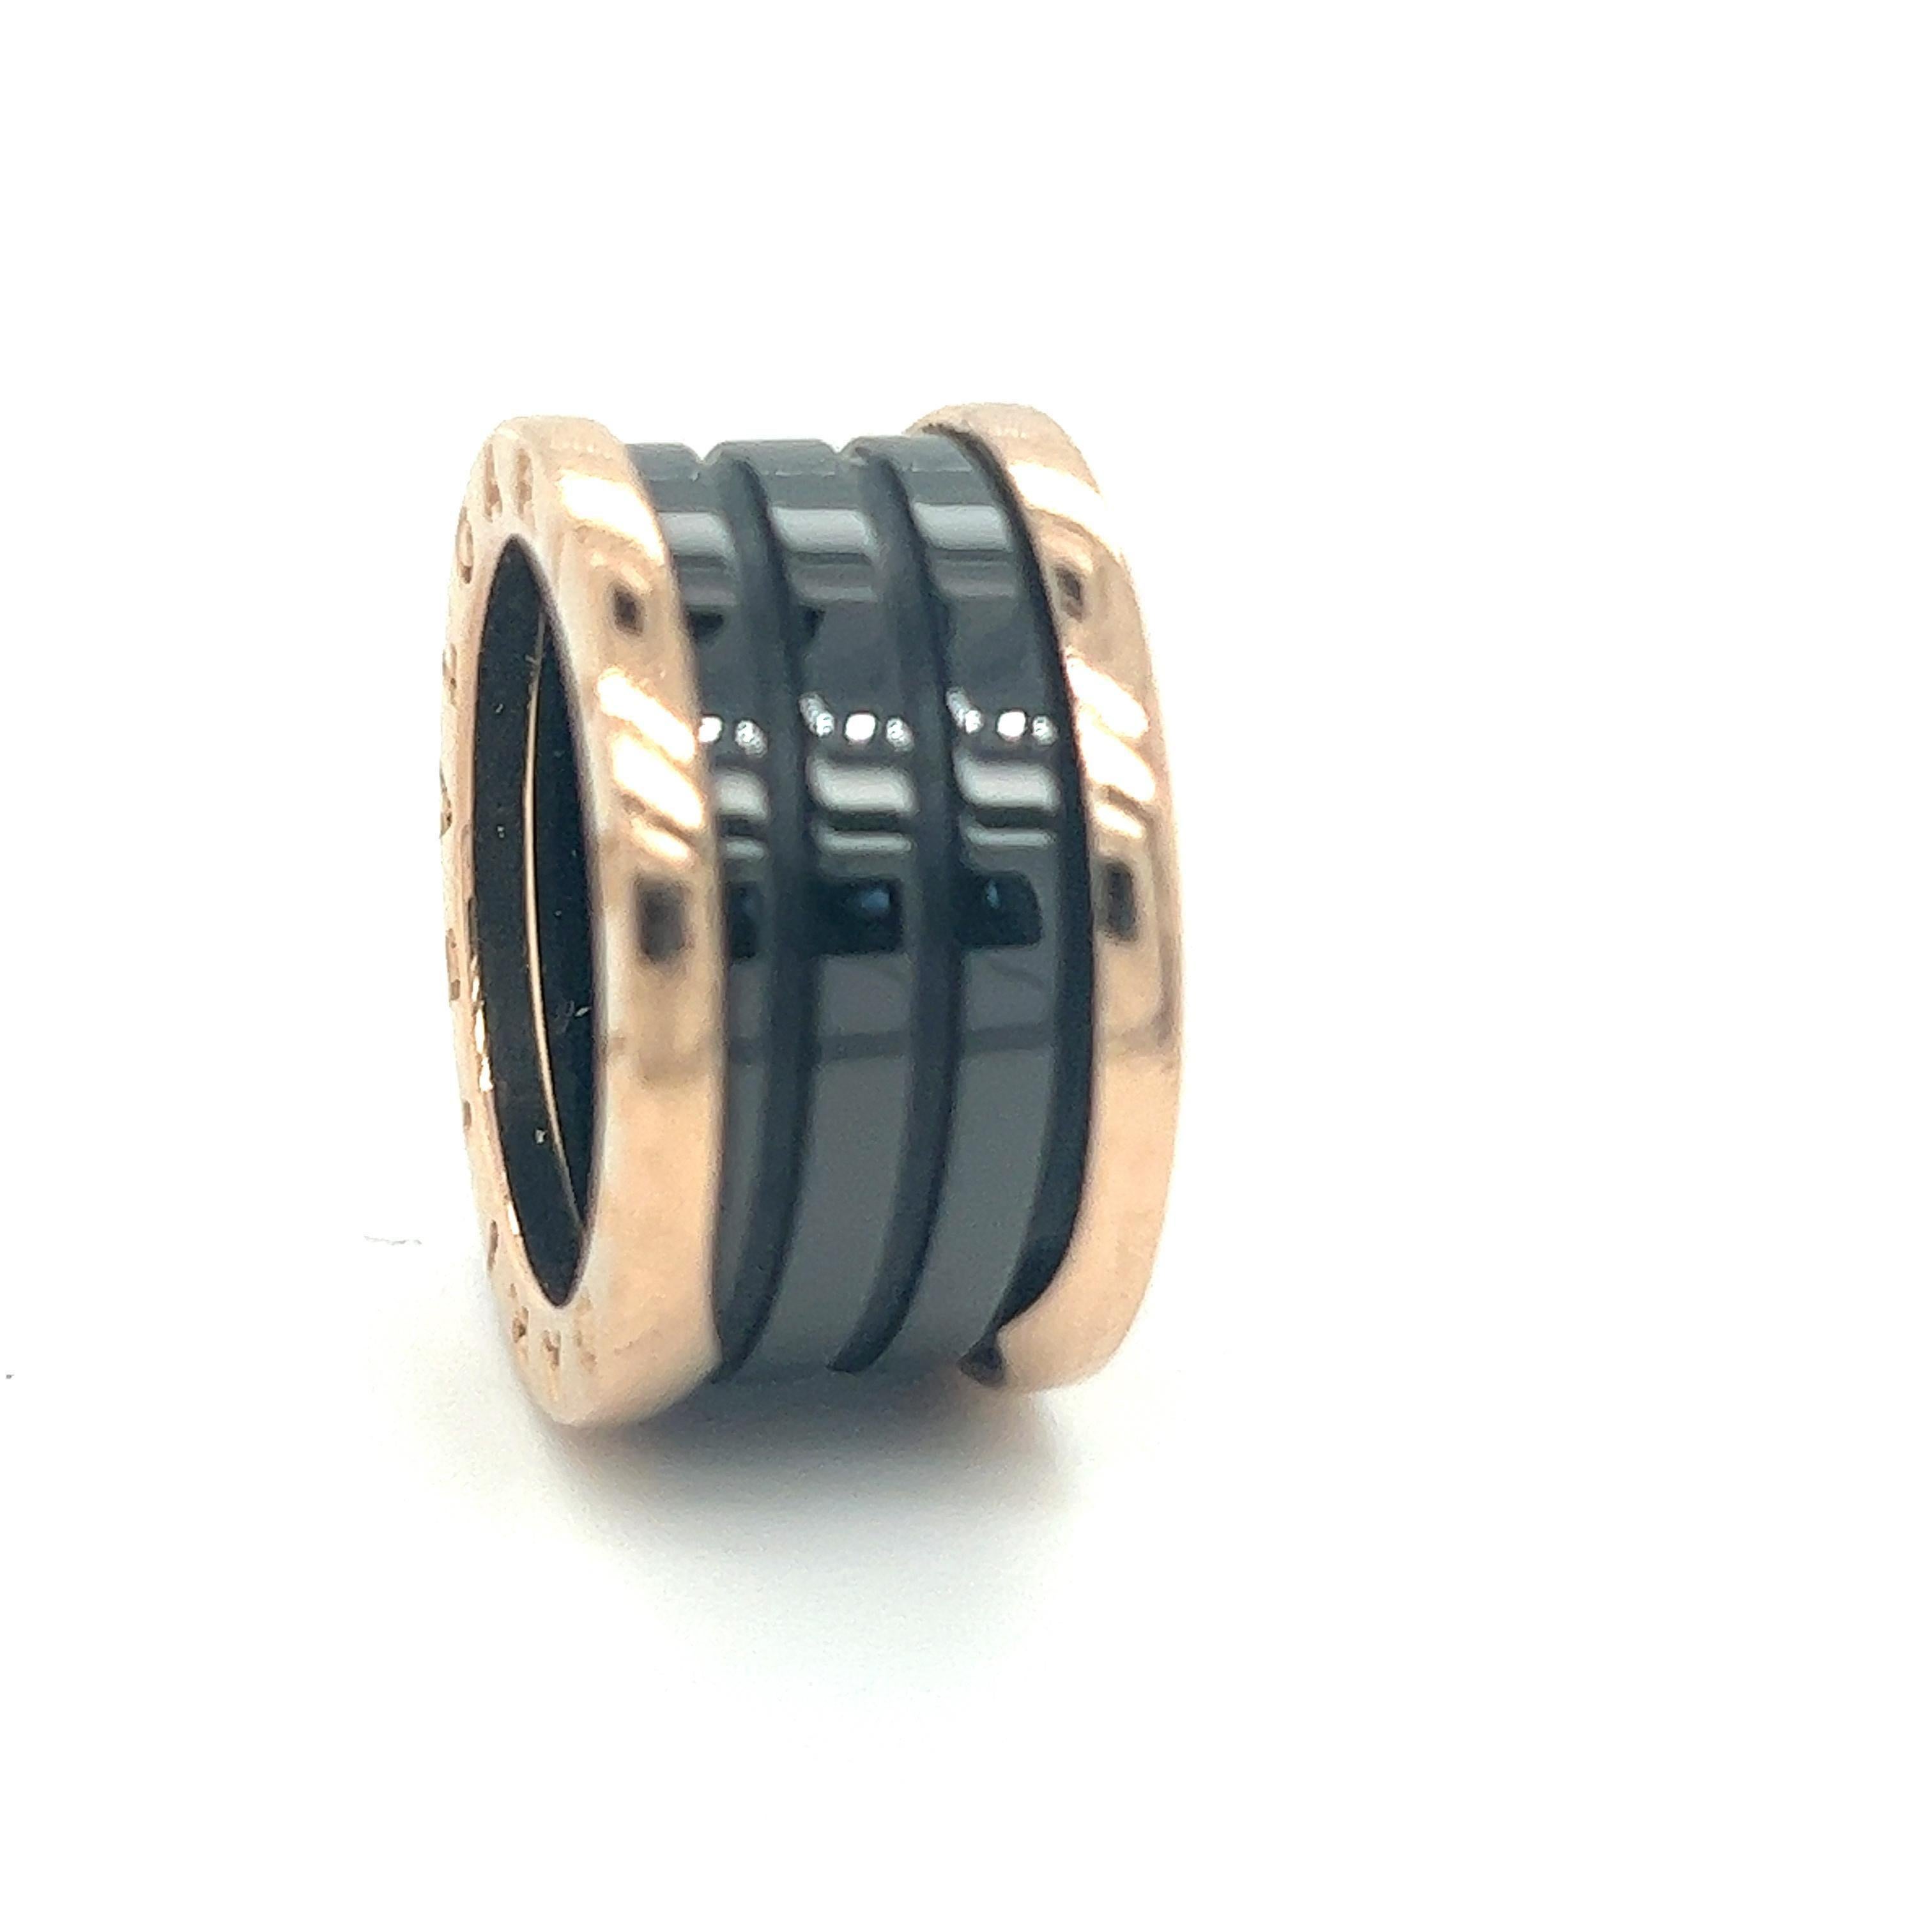 Bulgari large ring B-Zero collection, rose gold with black ceramic 

Bulgarian ring draws its inspiration from the most renowned amphitheater of the world, the Colosseum, the B.zero1 ring is a true statement of Bulgari’s creative vision, 

Signed